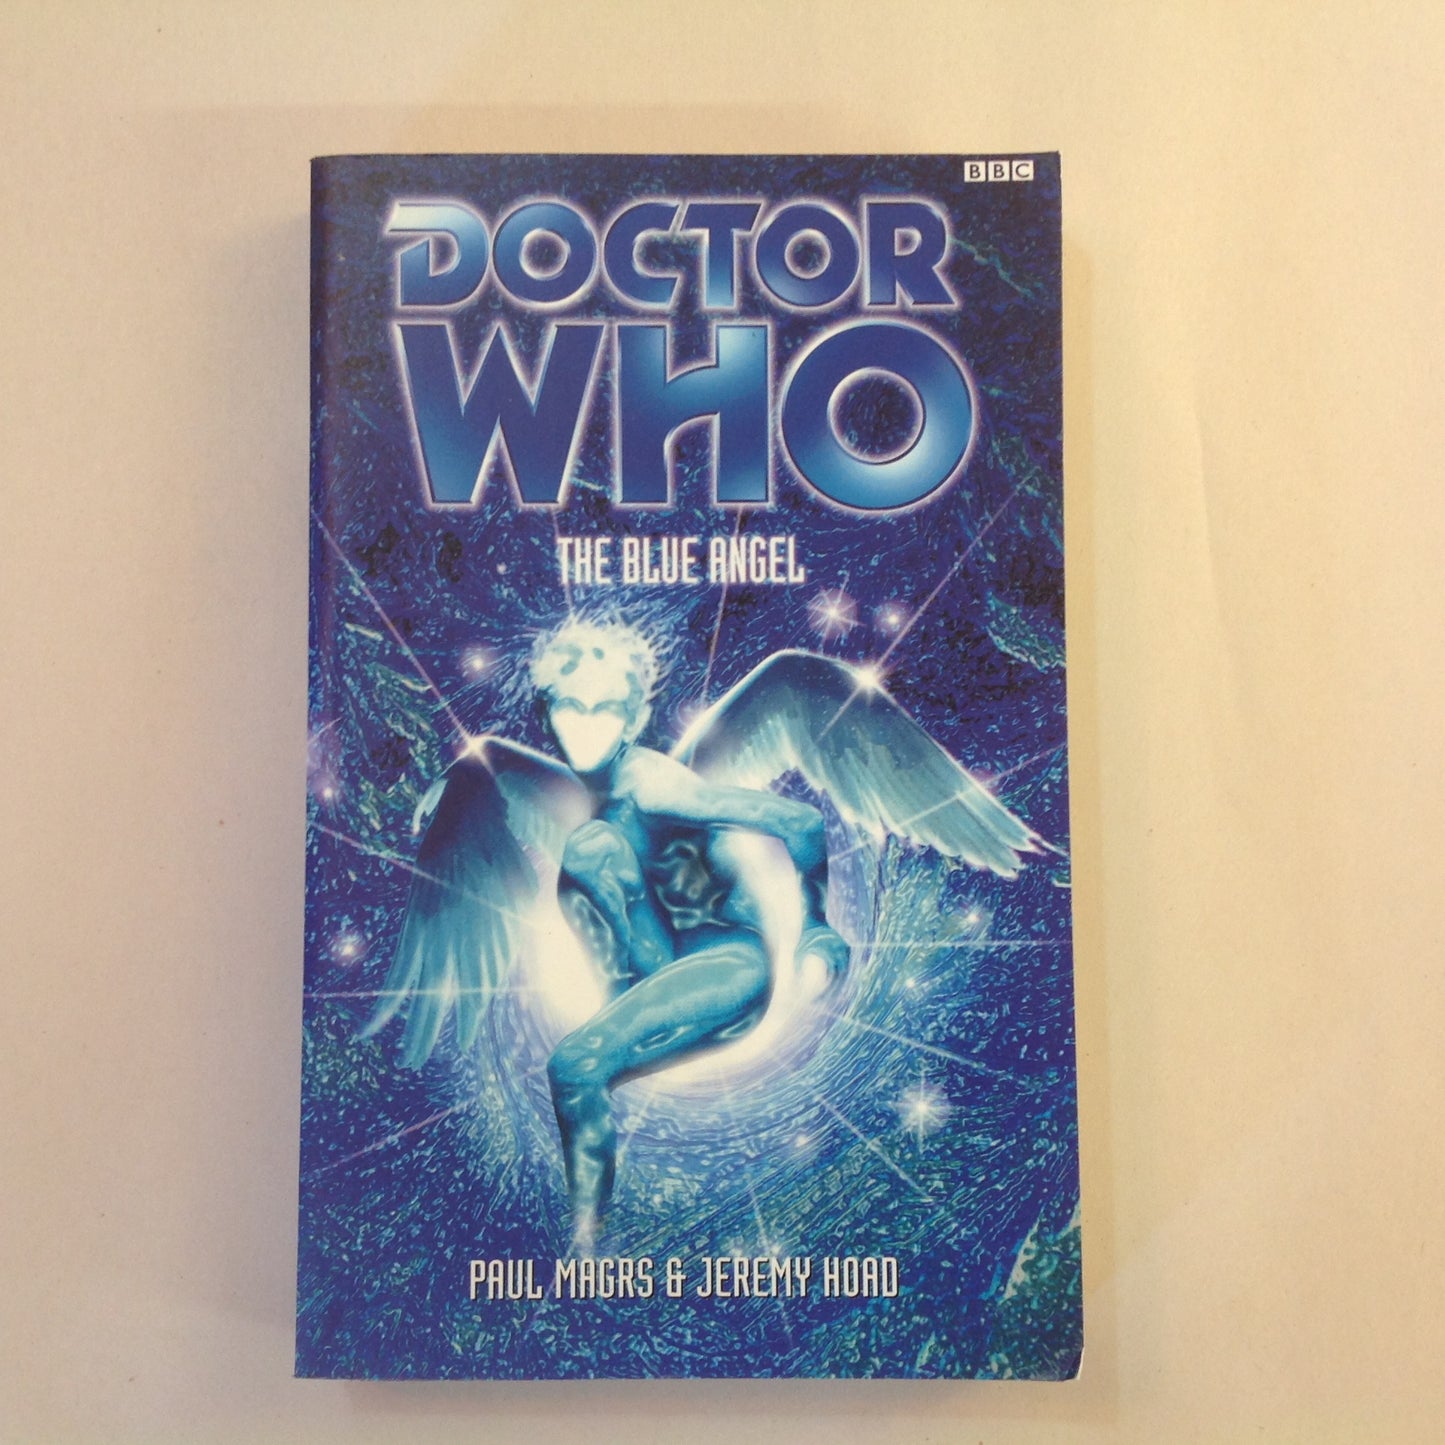 Vintage 1999 Mass Market Paperback Doctor Who: The Blue Angel Paul Magrs & Jeremy Hoad First Edition